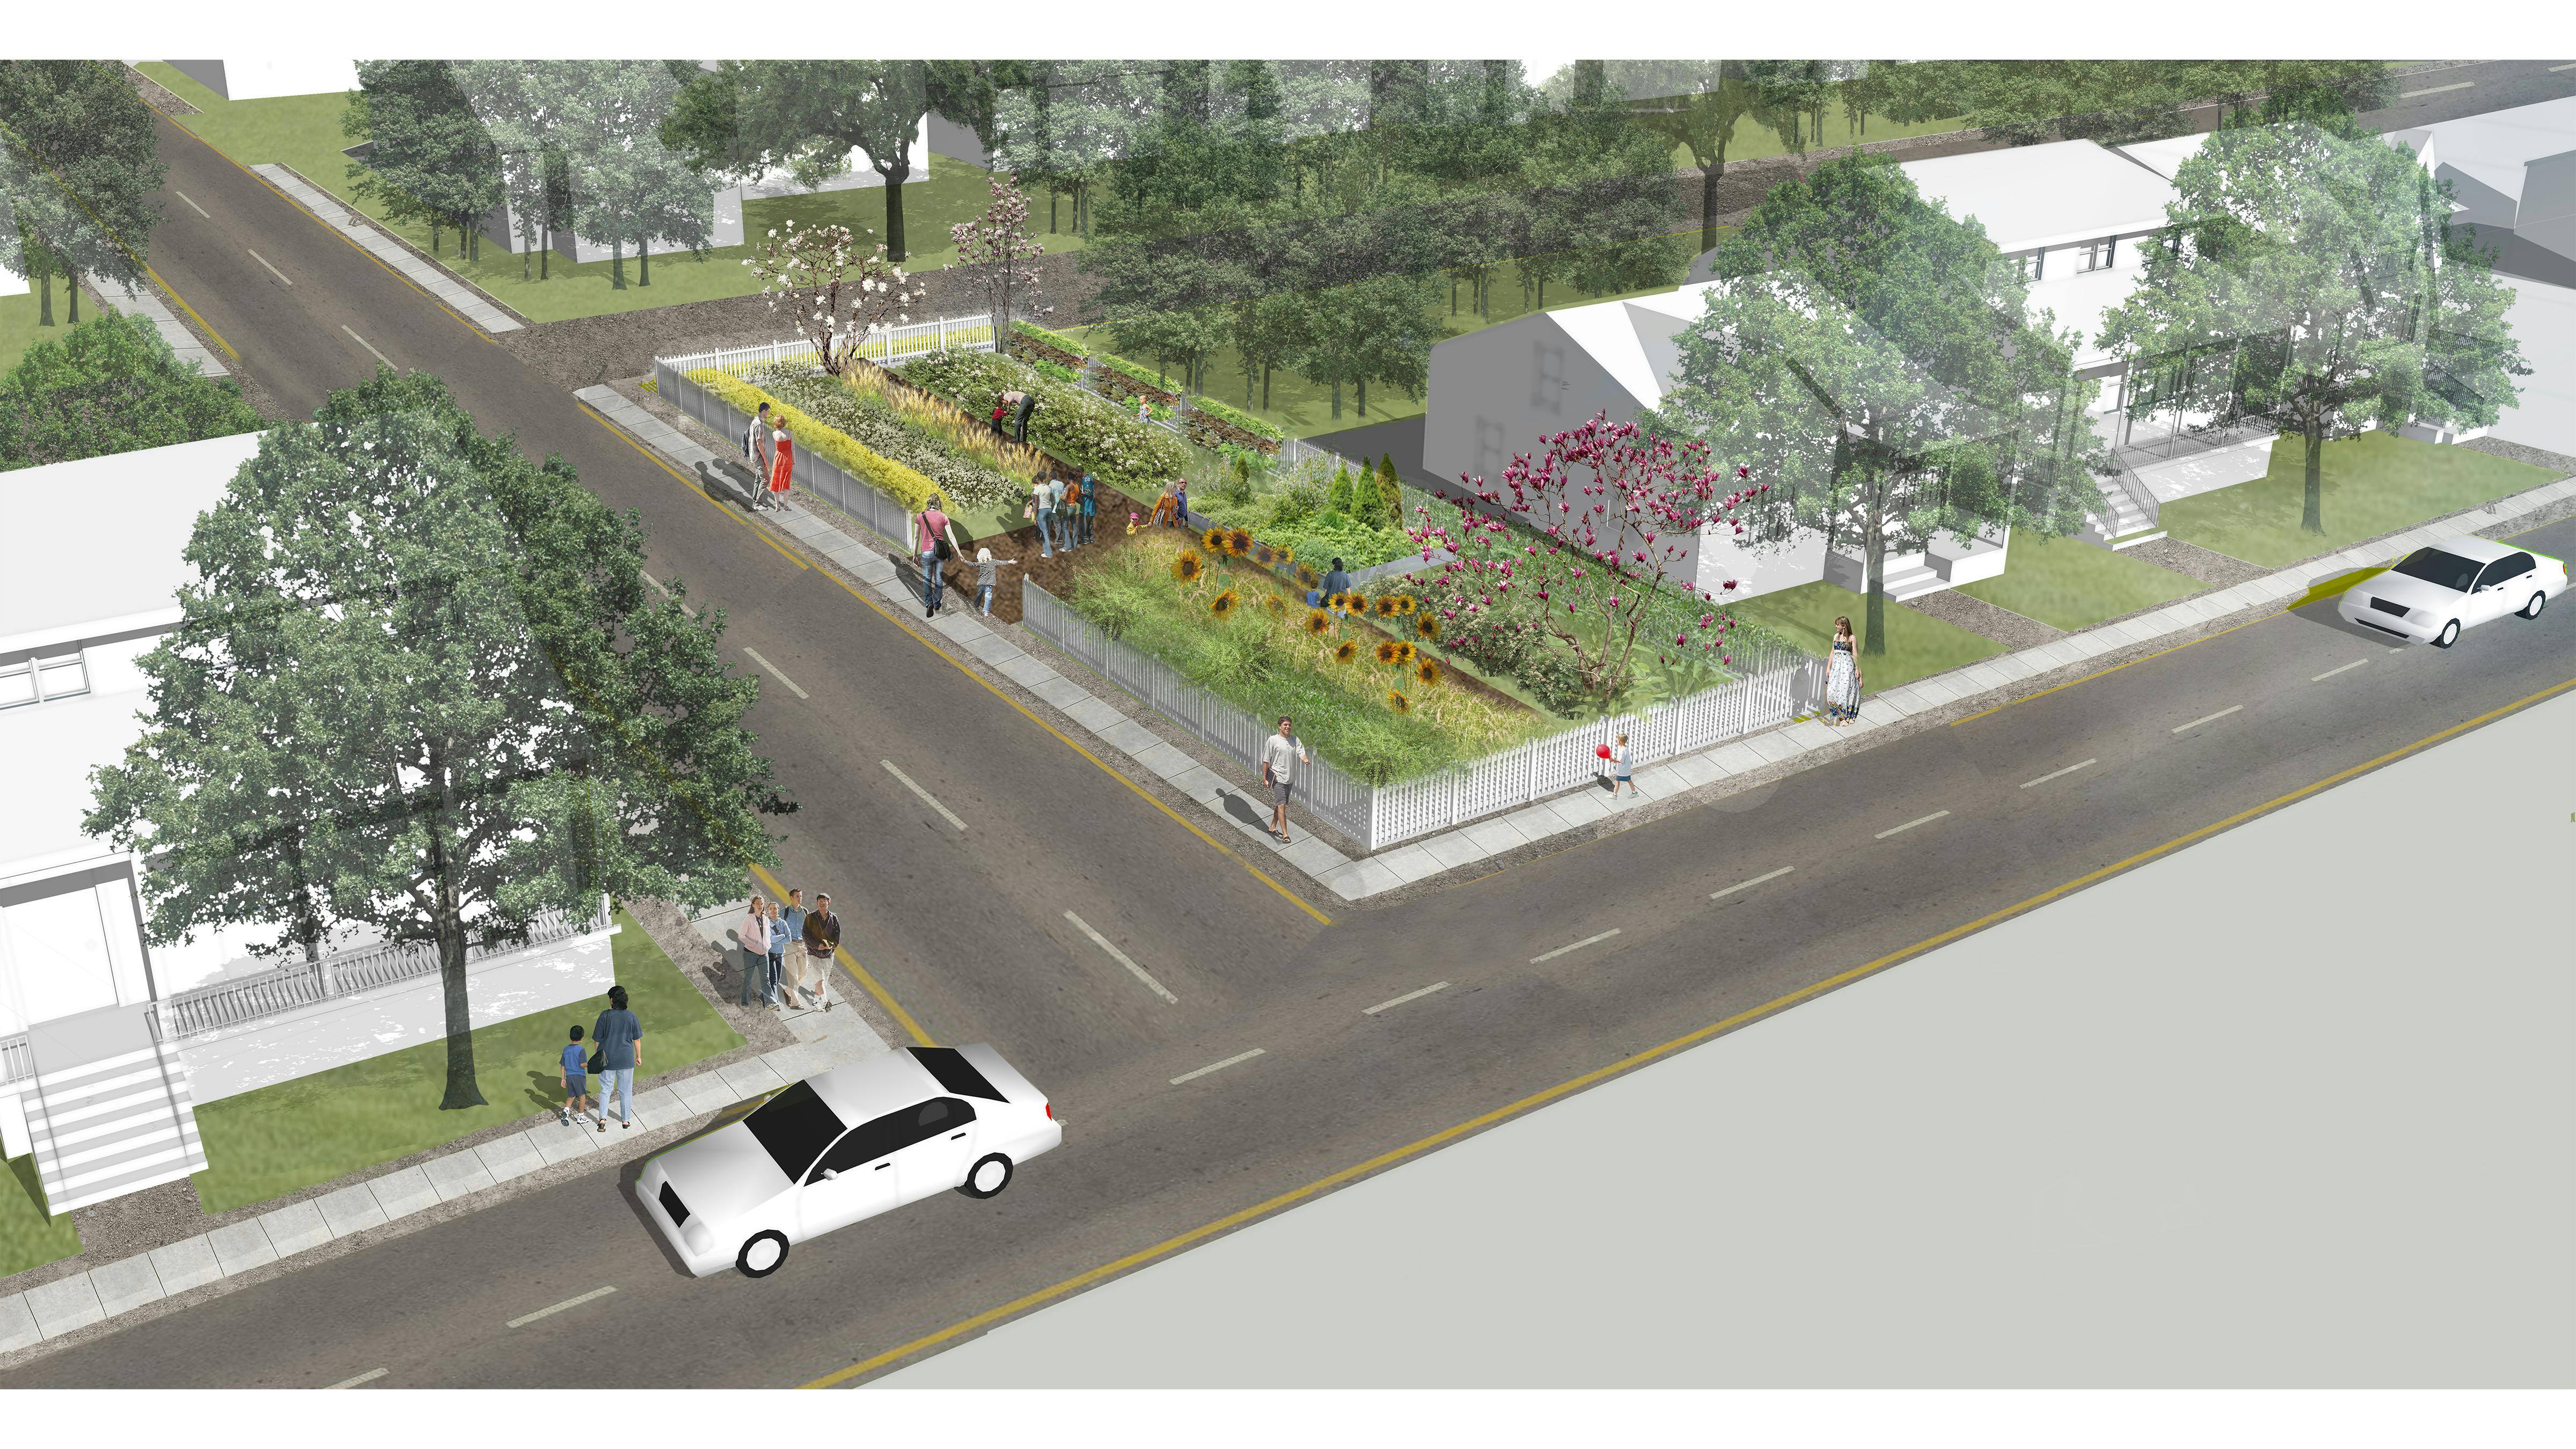 Perspective rendering of a vacant lot transformed into a community garden with sunflowers, ornamental grasses, shrubs, and perennial plants.